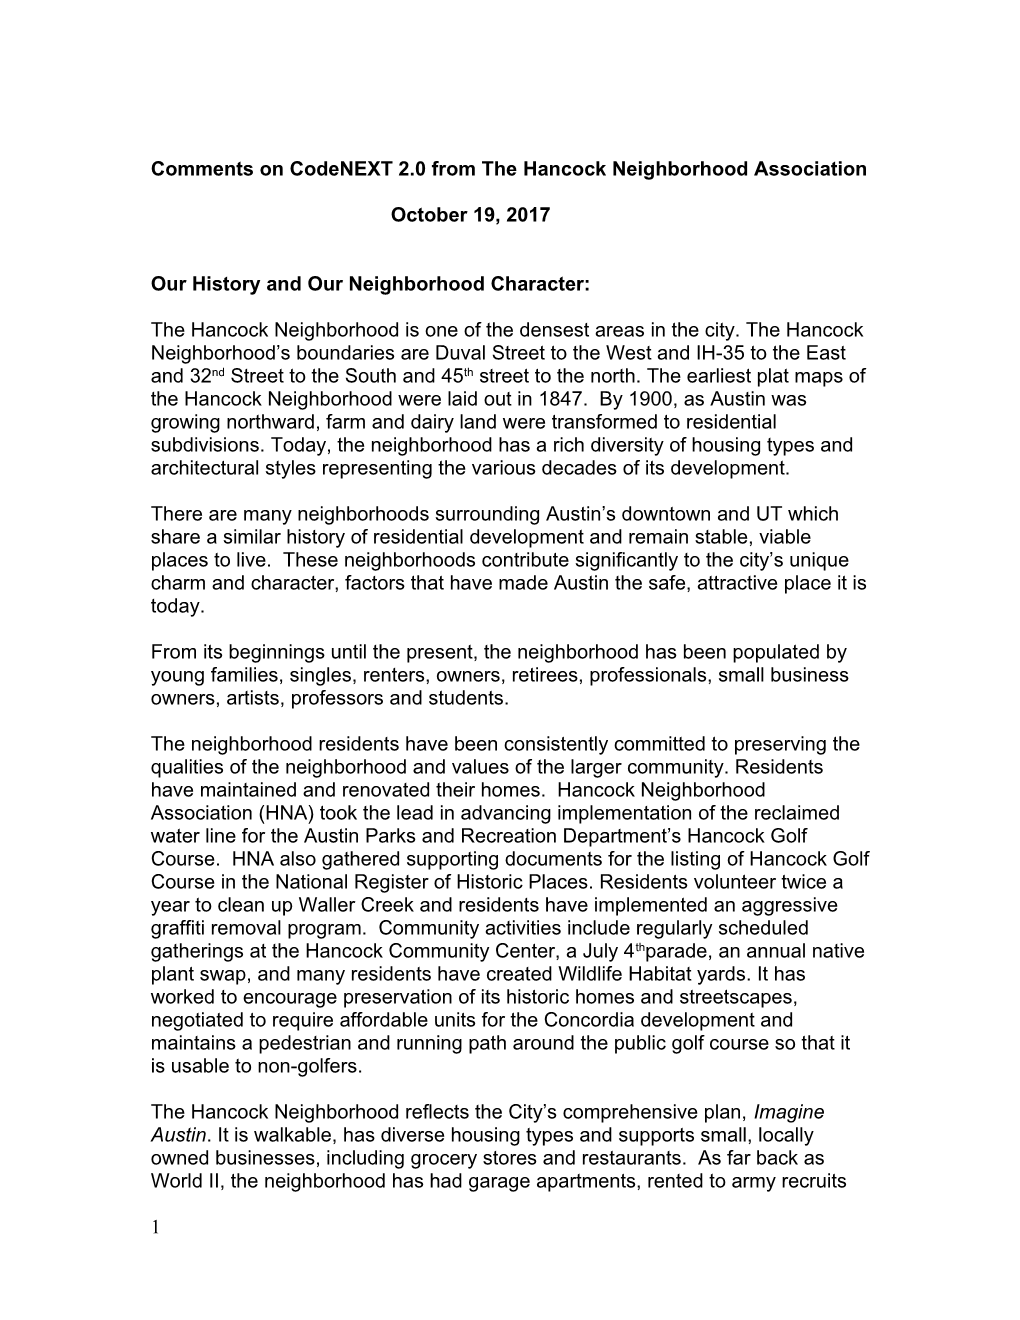 Comments on Codenext2.0 from Thehancock Neighborhood Association